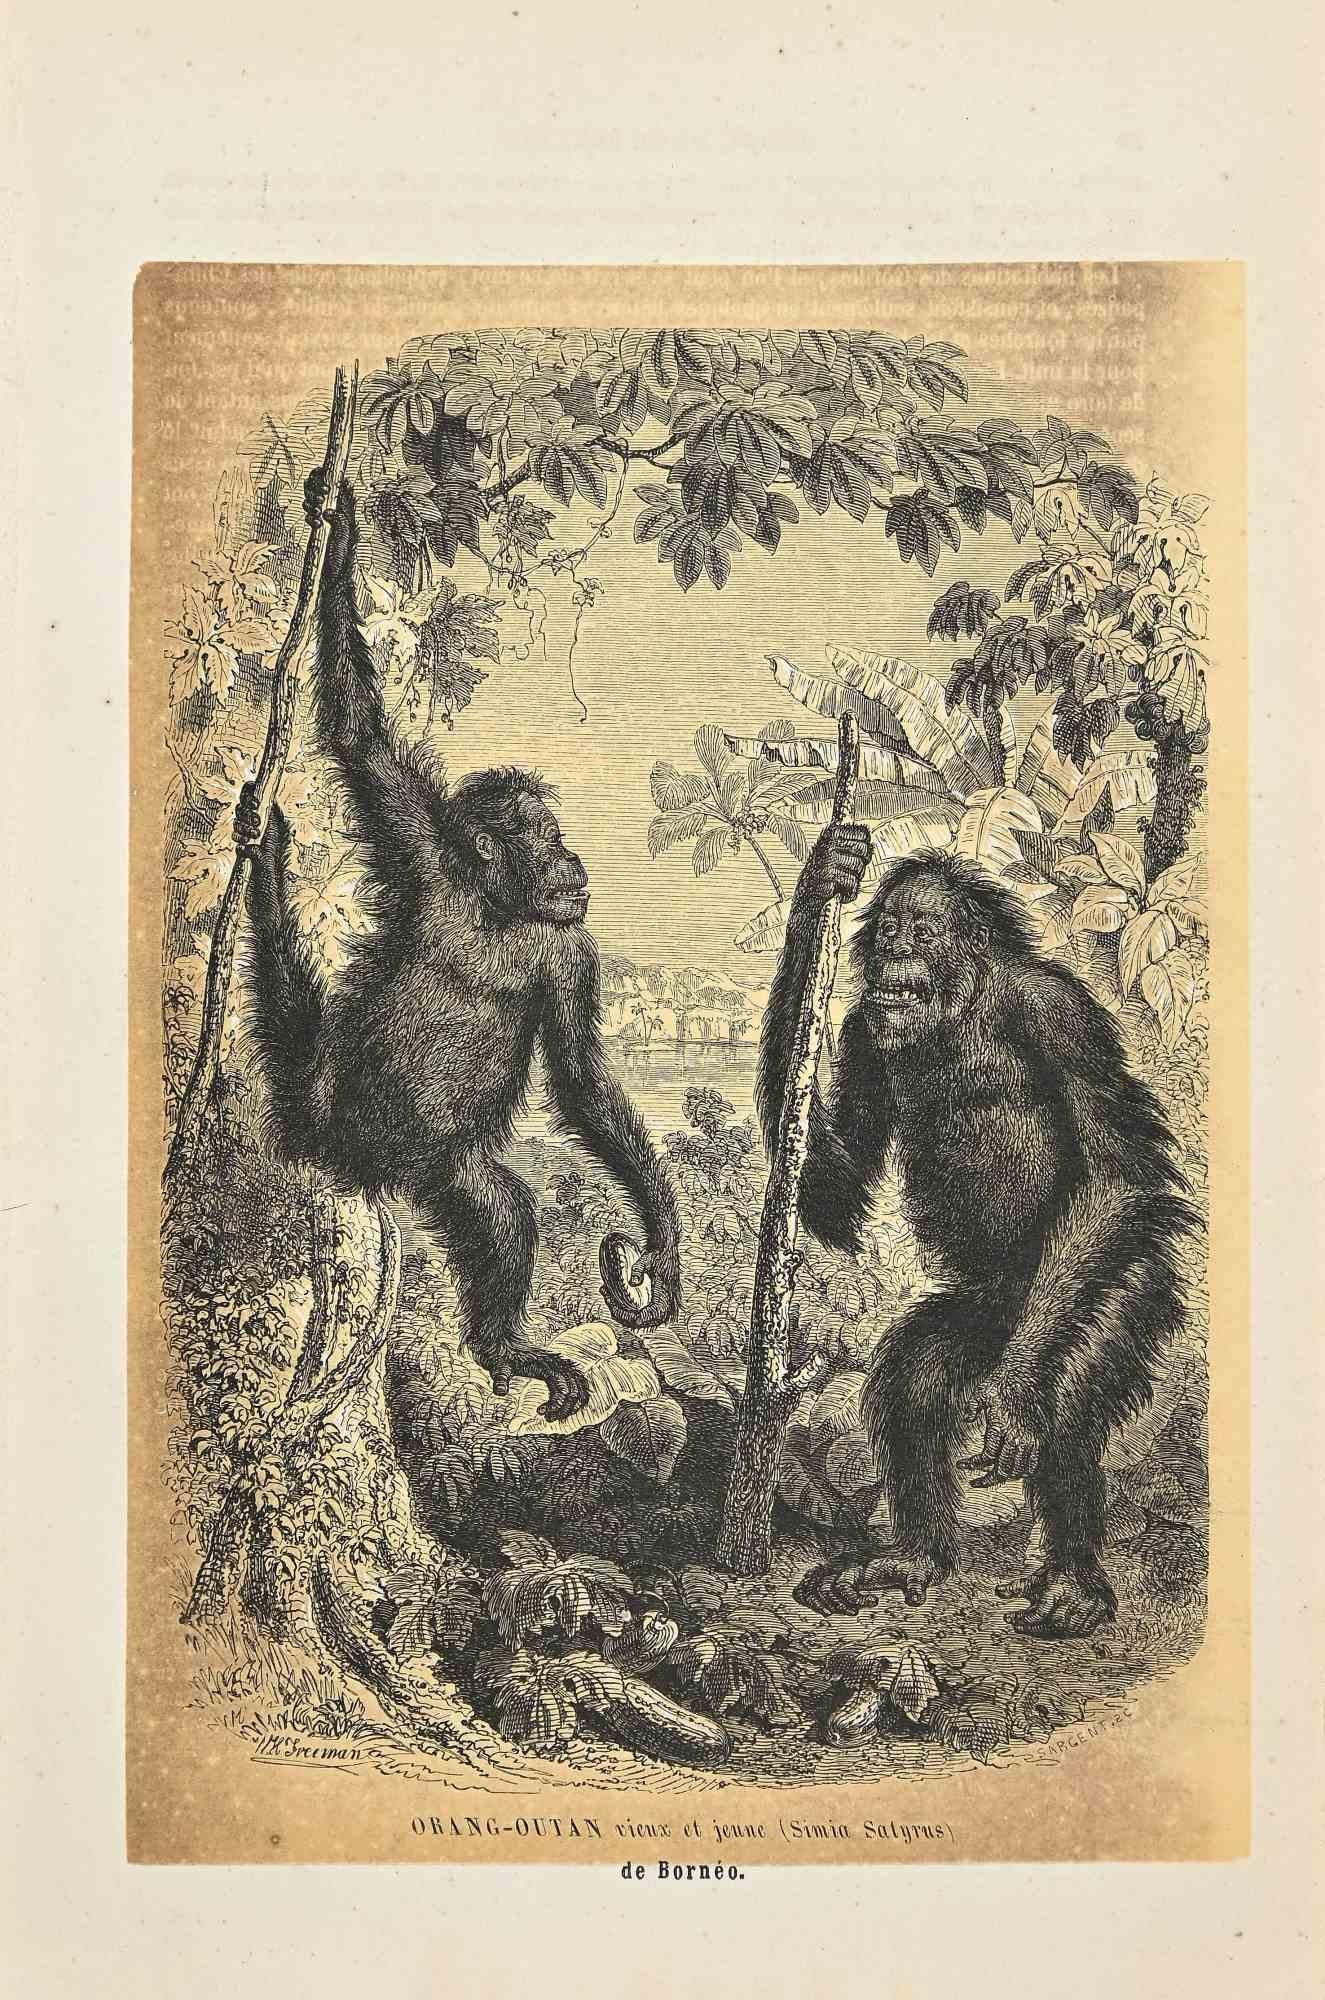 Orang-Outan is an original lithograph on ivory-colored paper, realized by Paul Gervais (1816-1879). The artwork is from The Series of "Les Trois Règnes de la Nature", and was published in 1854.

Good conditions except for some fixings.

Titled on